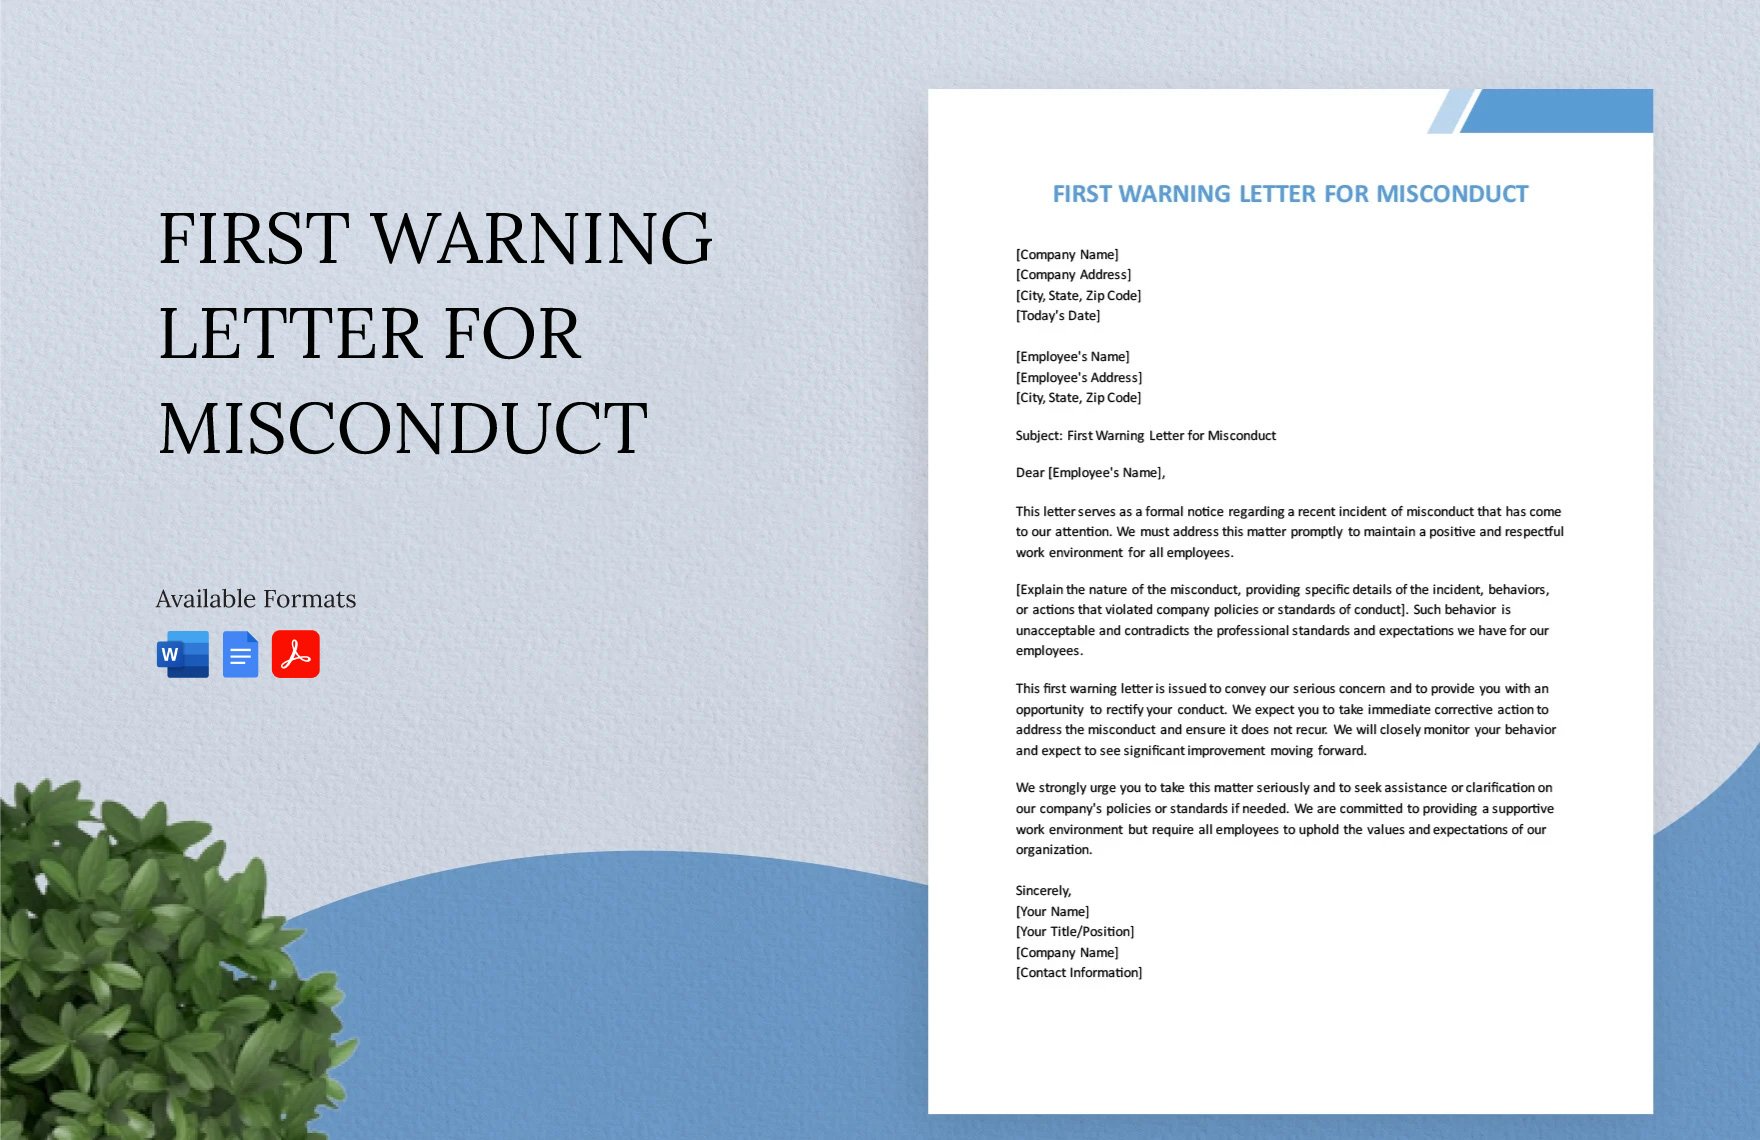 First Warning Letter For Misconduct